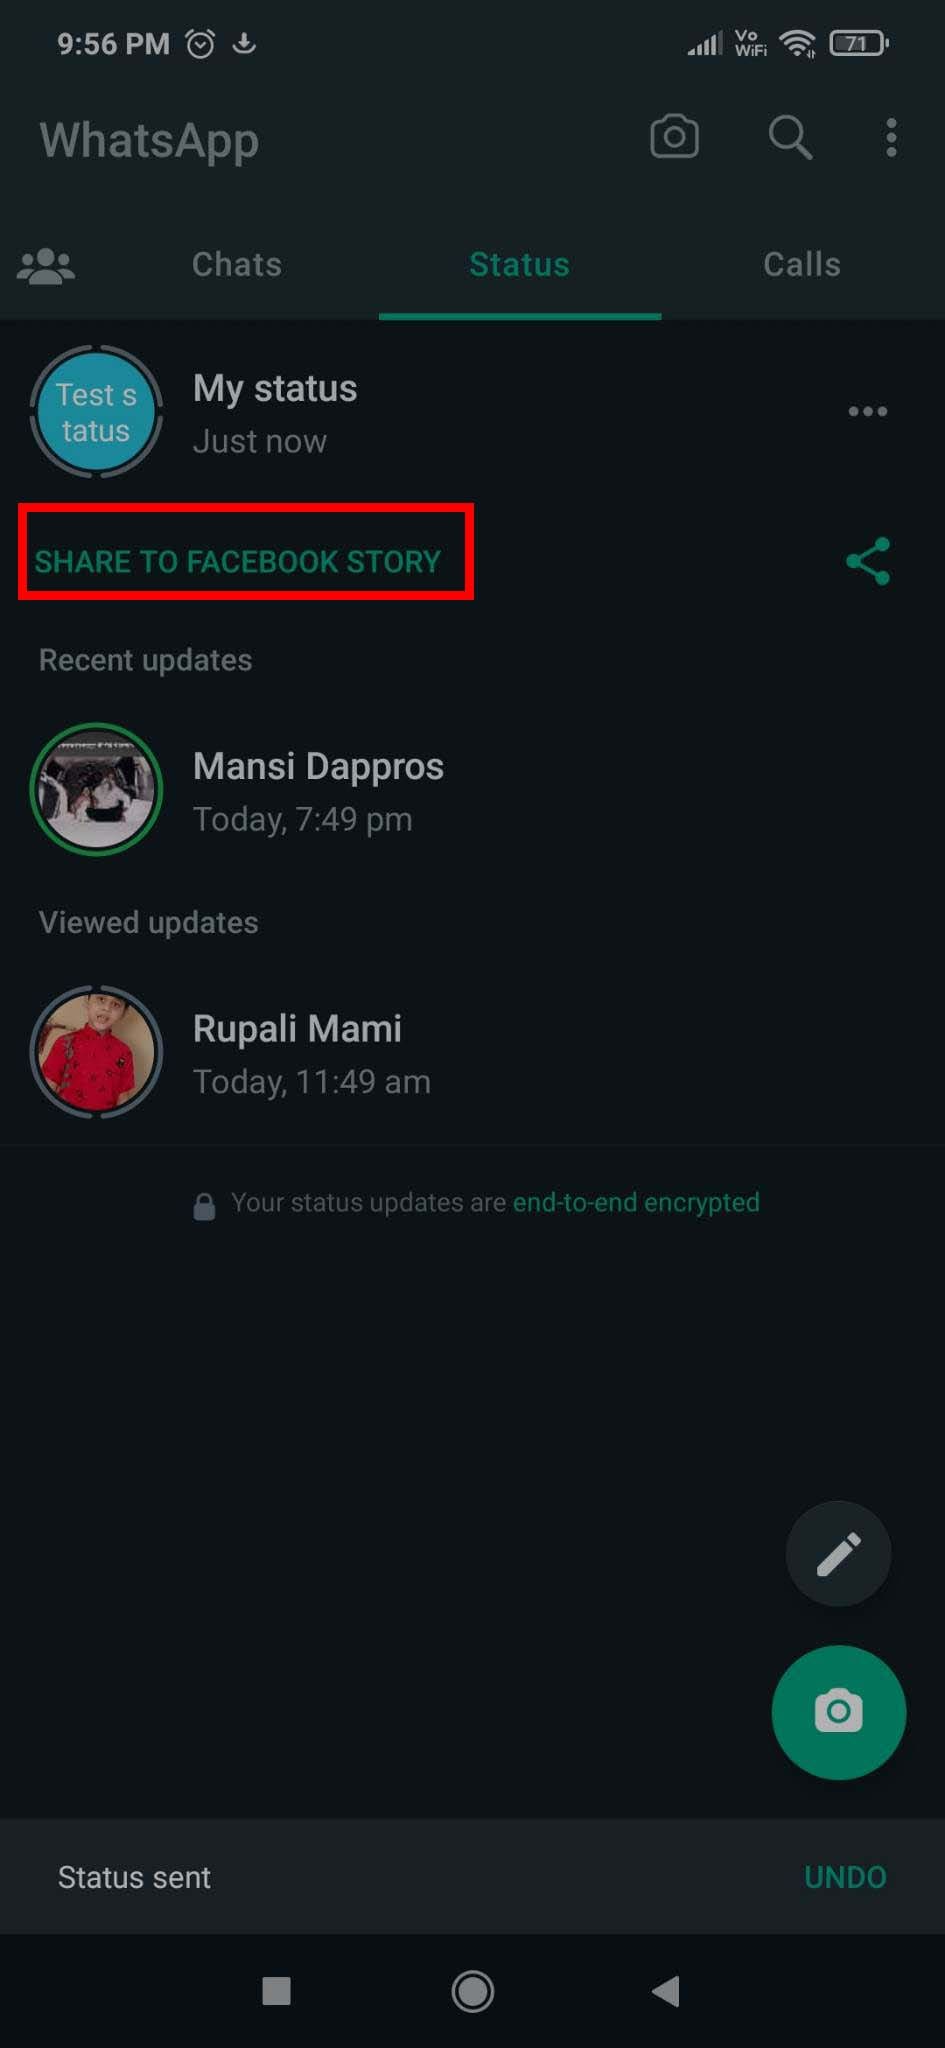 Share to Facebook Story option on WhatsApp